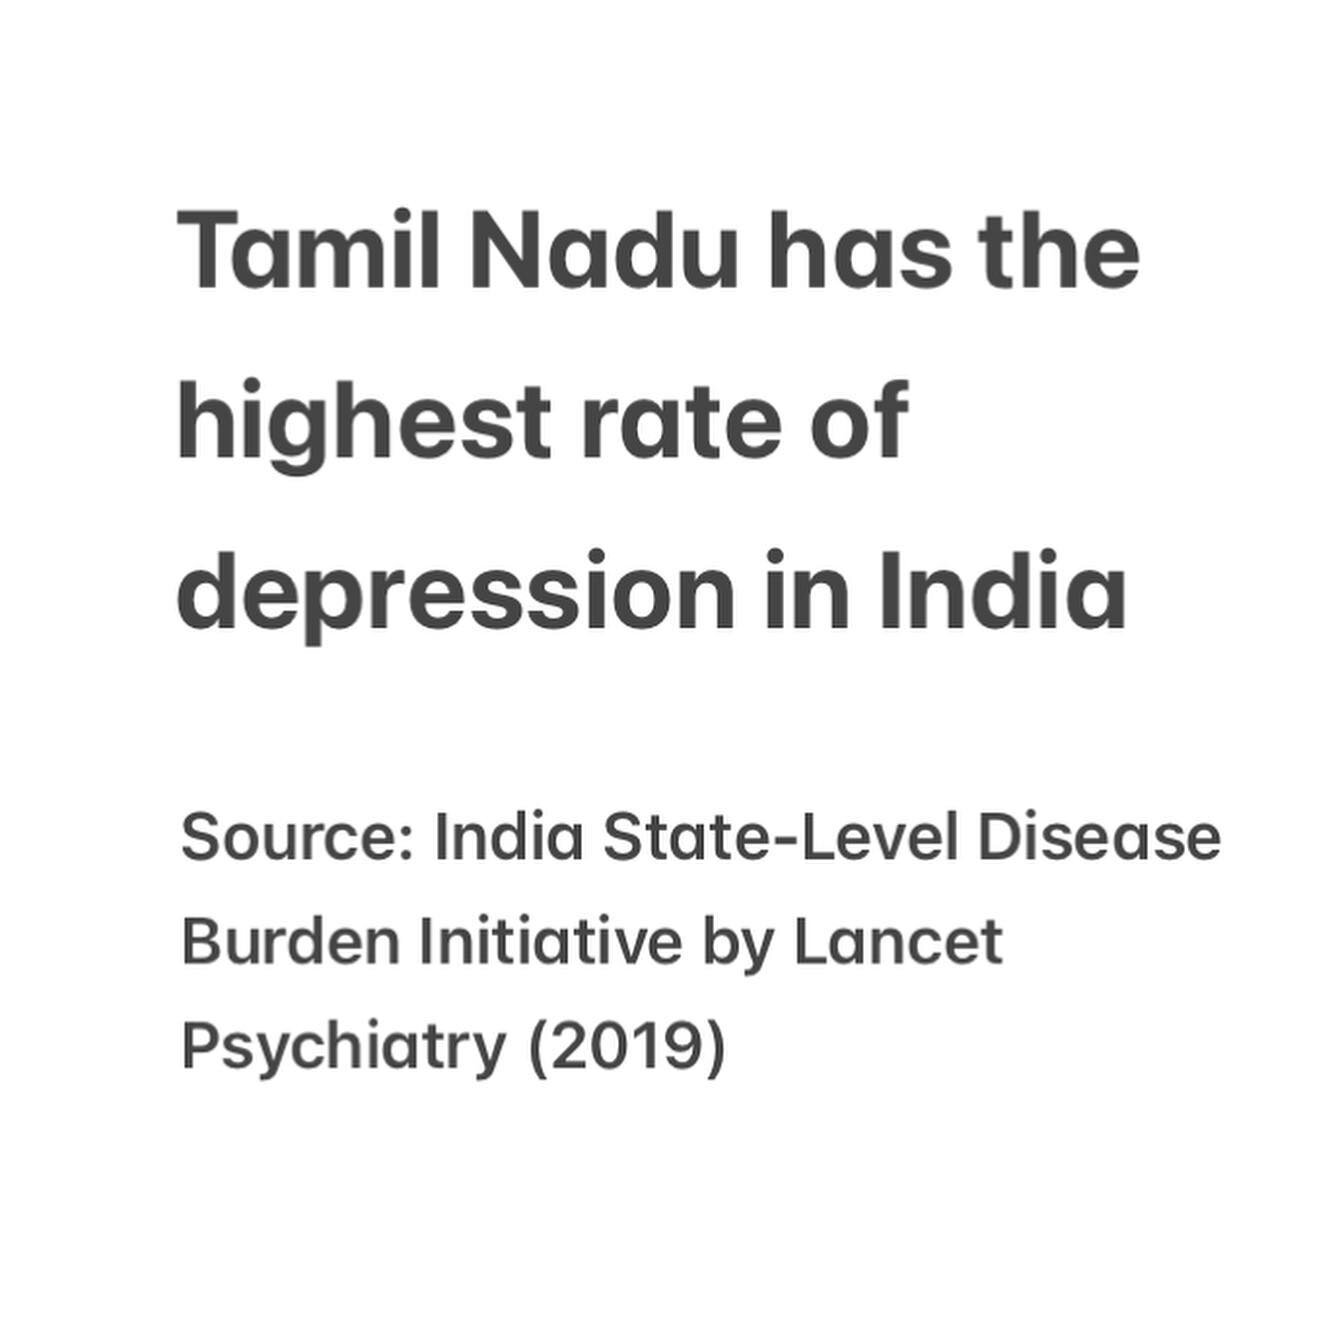 Tamil Nadu has the highest rate of state-wise depression in India according to the India State-Level Disease Burden Initiative by Lancet Psychiatry. 

The highest rates of depression in order were found in Tamil Nadu, Kerala, Goa and Telangana. 

We 